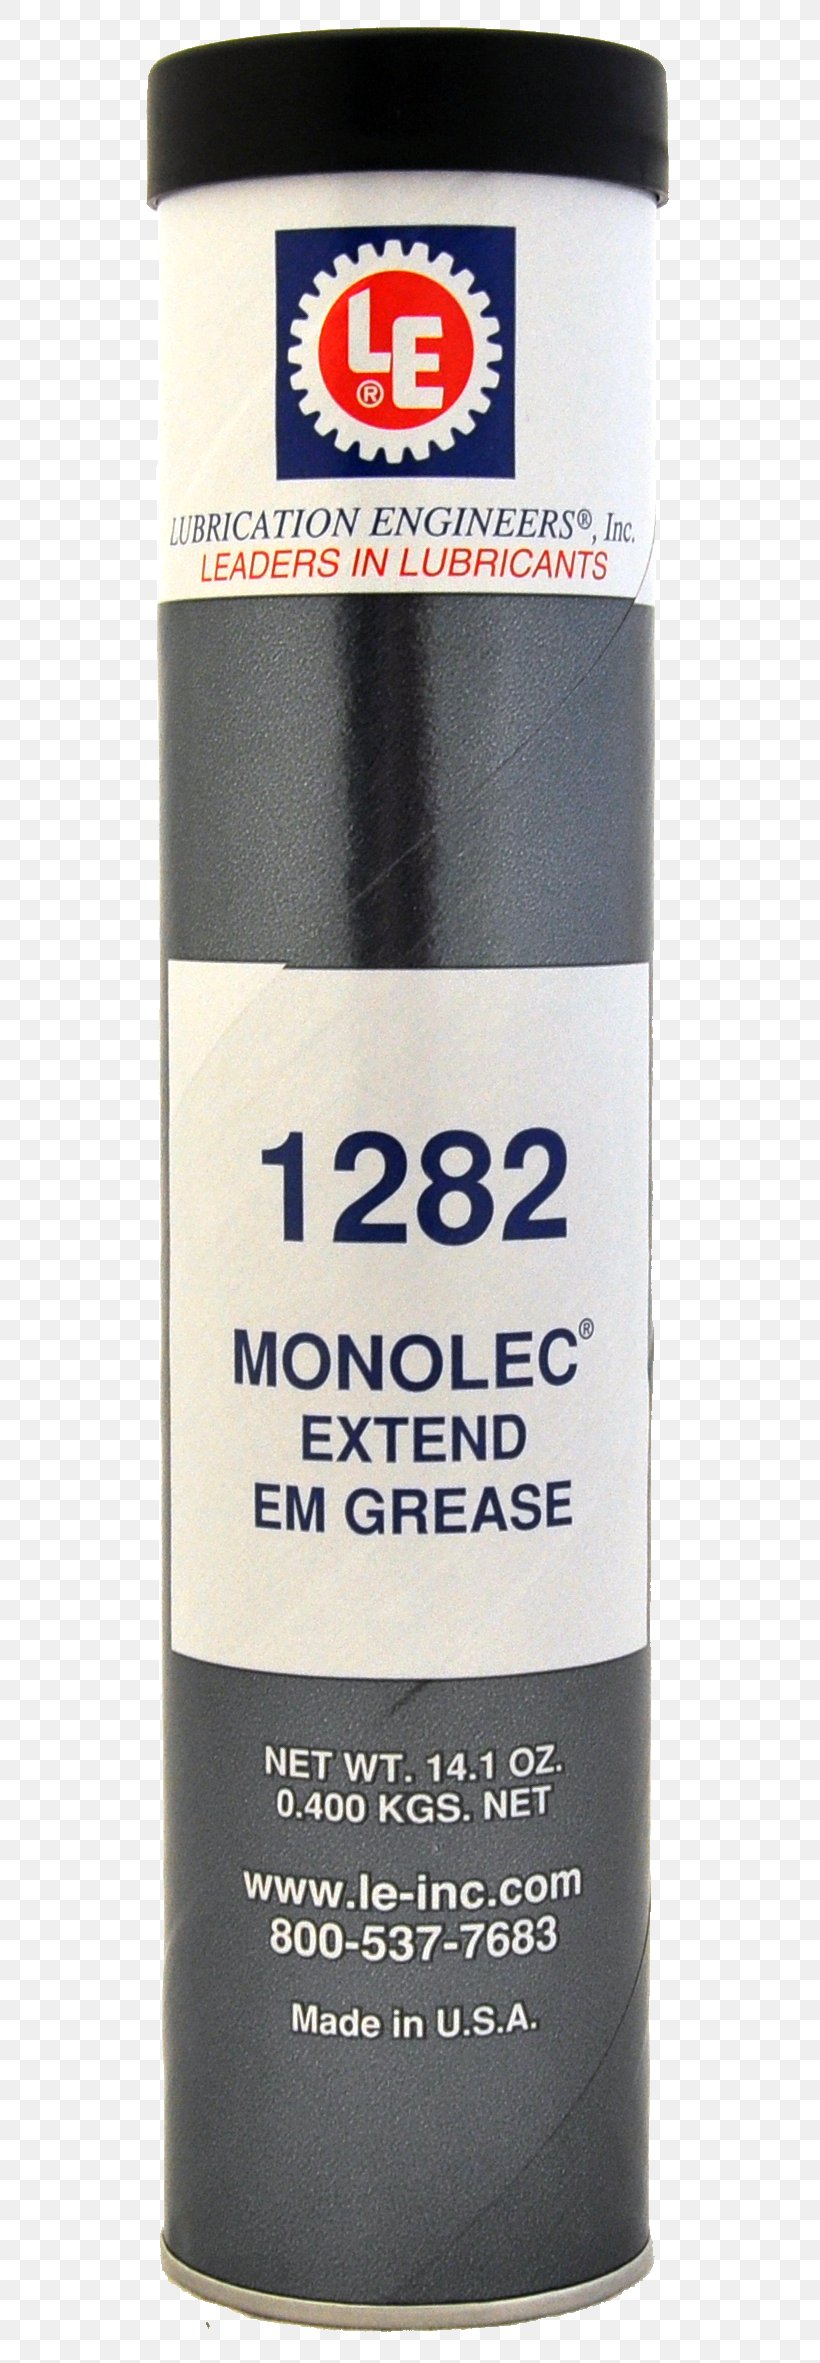 First World War Lubricant Grease Electric Motor Product, PNG, 594x2363px, First World War, Com, Electric Motor, Electricity, Grease Download Free